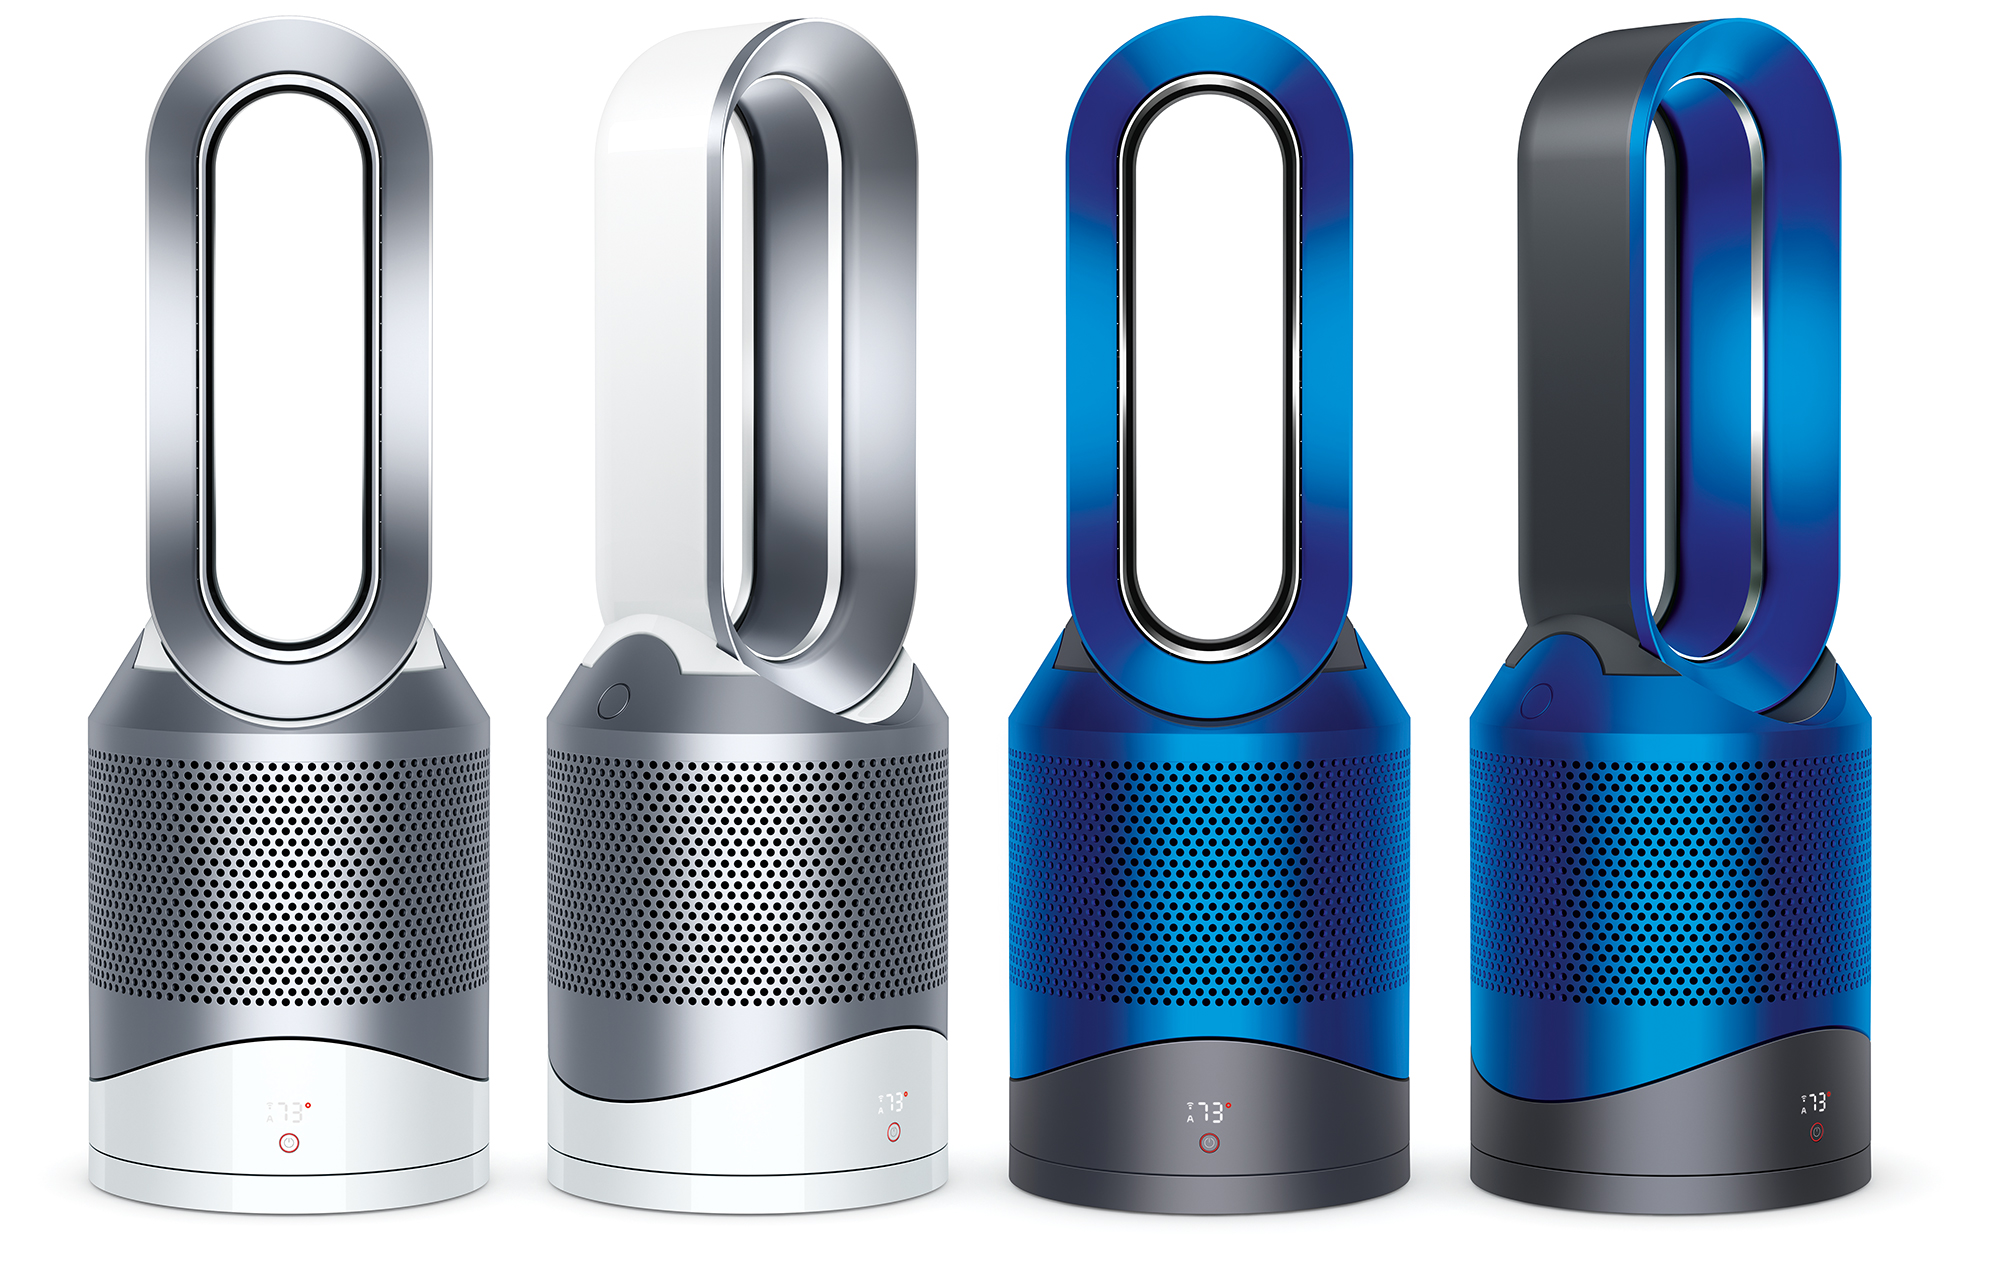 Dyson’s New $749 Smart-Fan Heats, Cools And Purifies Air